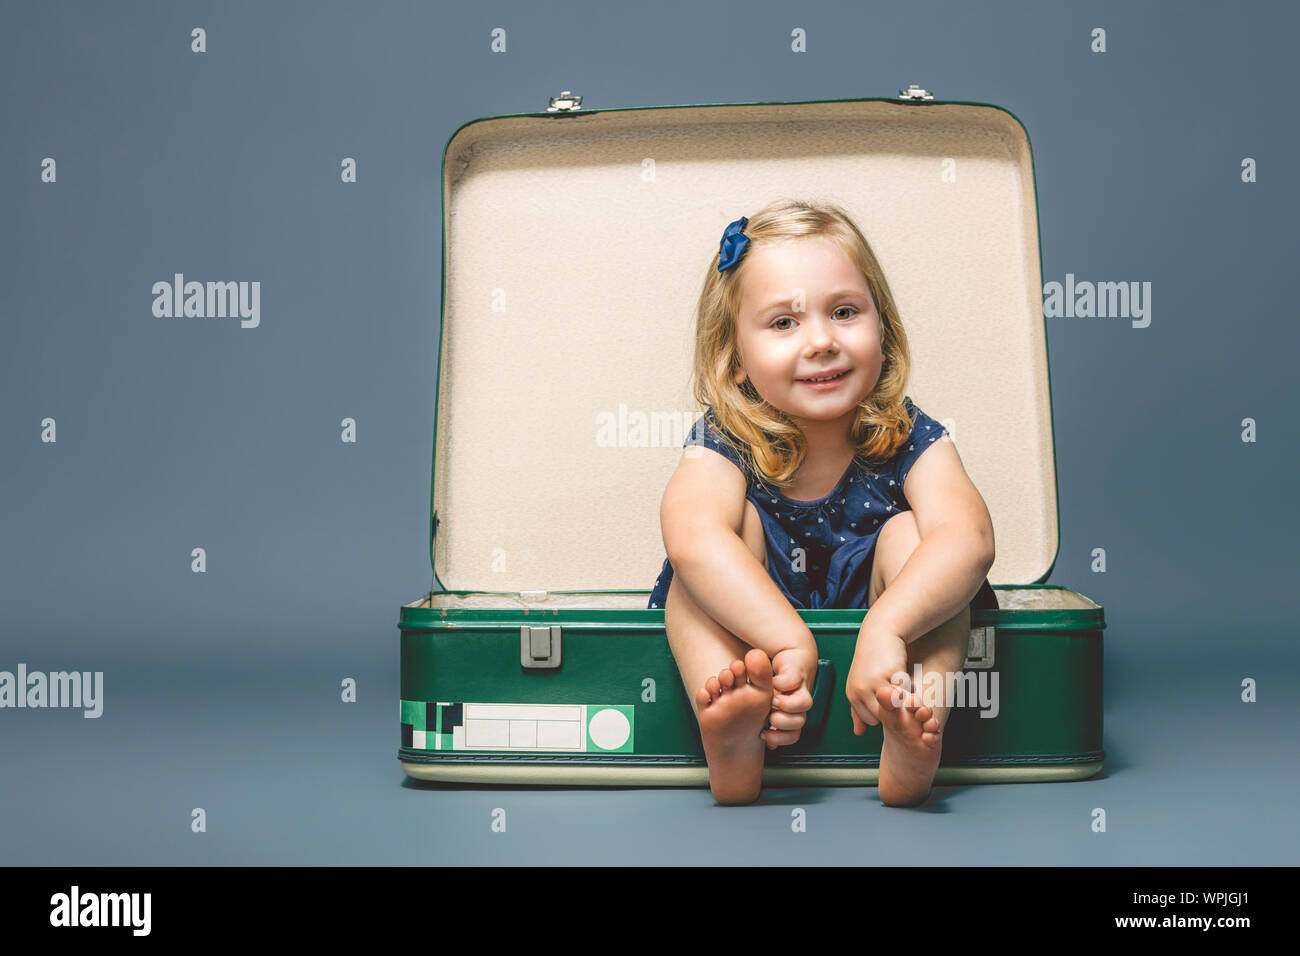 portrait of a 3 year old girl barefoot sitting inside an old suitcase. shot taken in the studio. Stock Photo